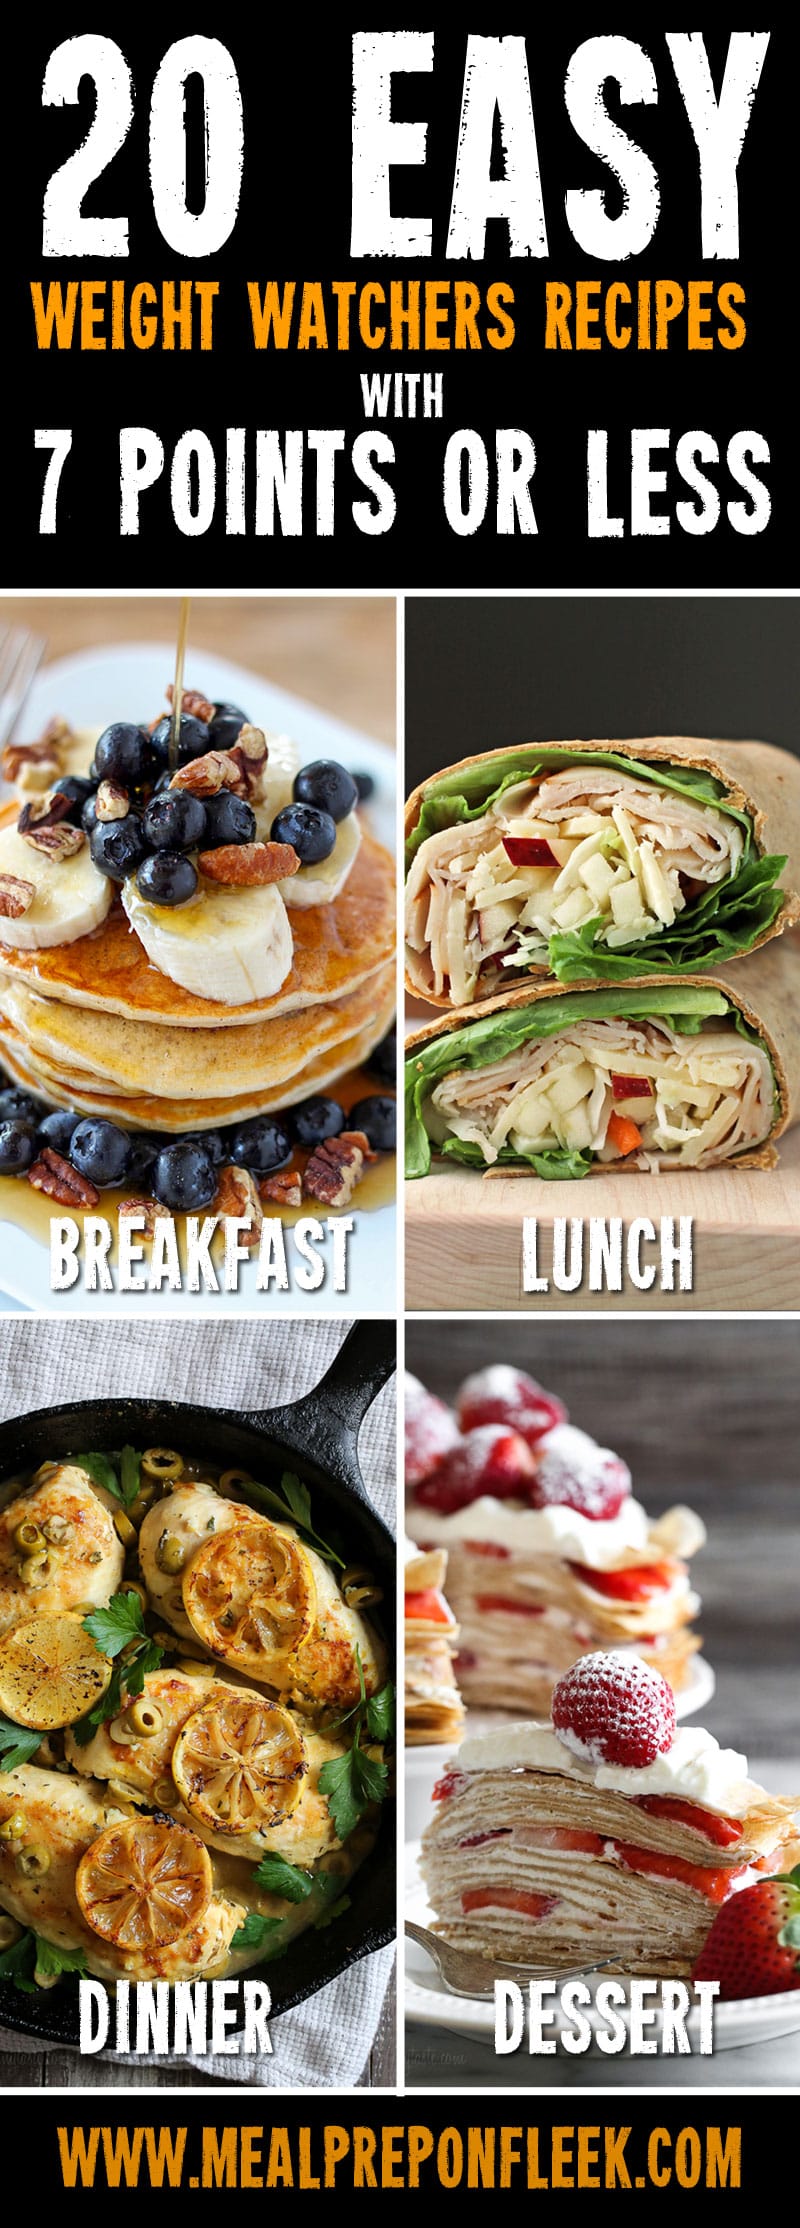 20-Easy-Weight-Watchers-Recipes-With-7-Points-Or-Less-